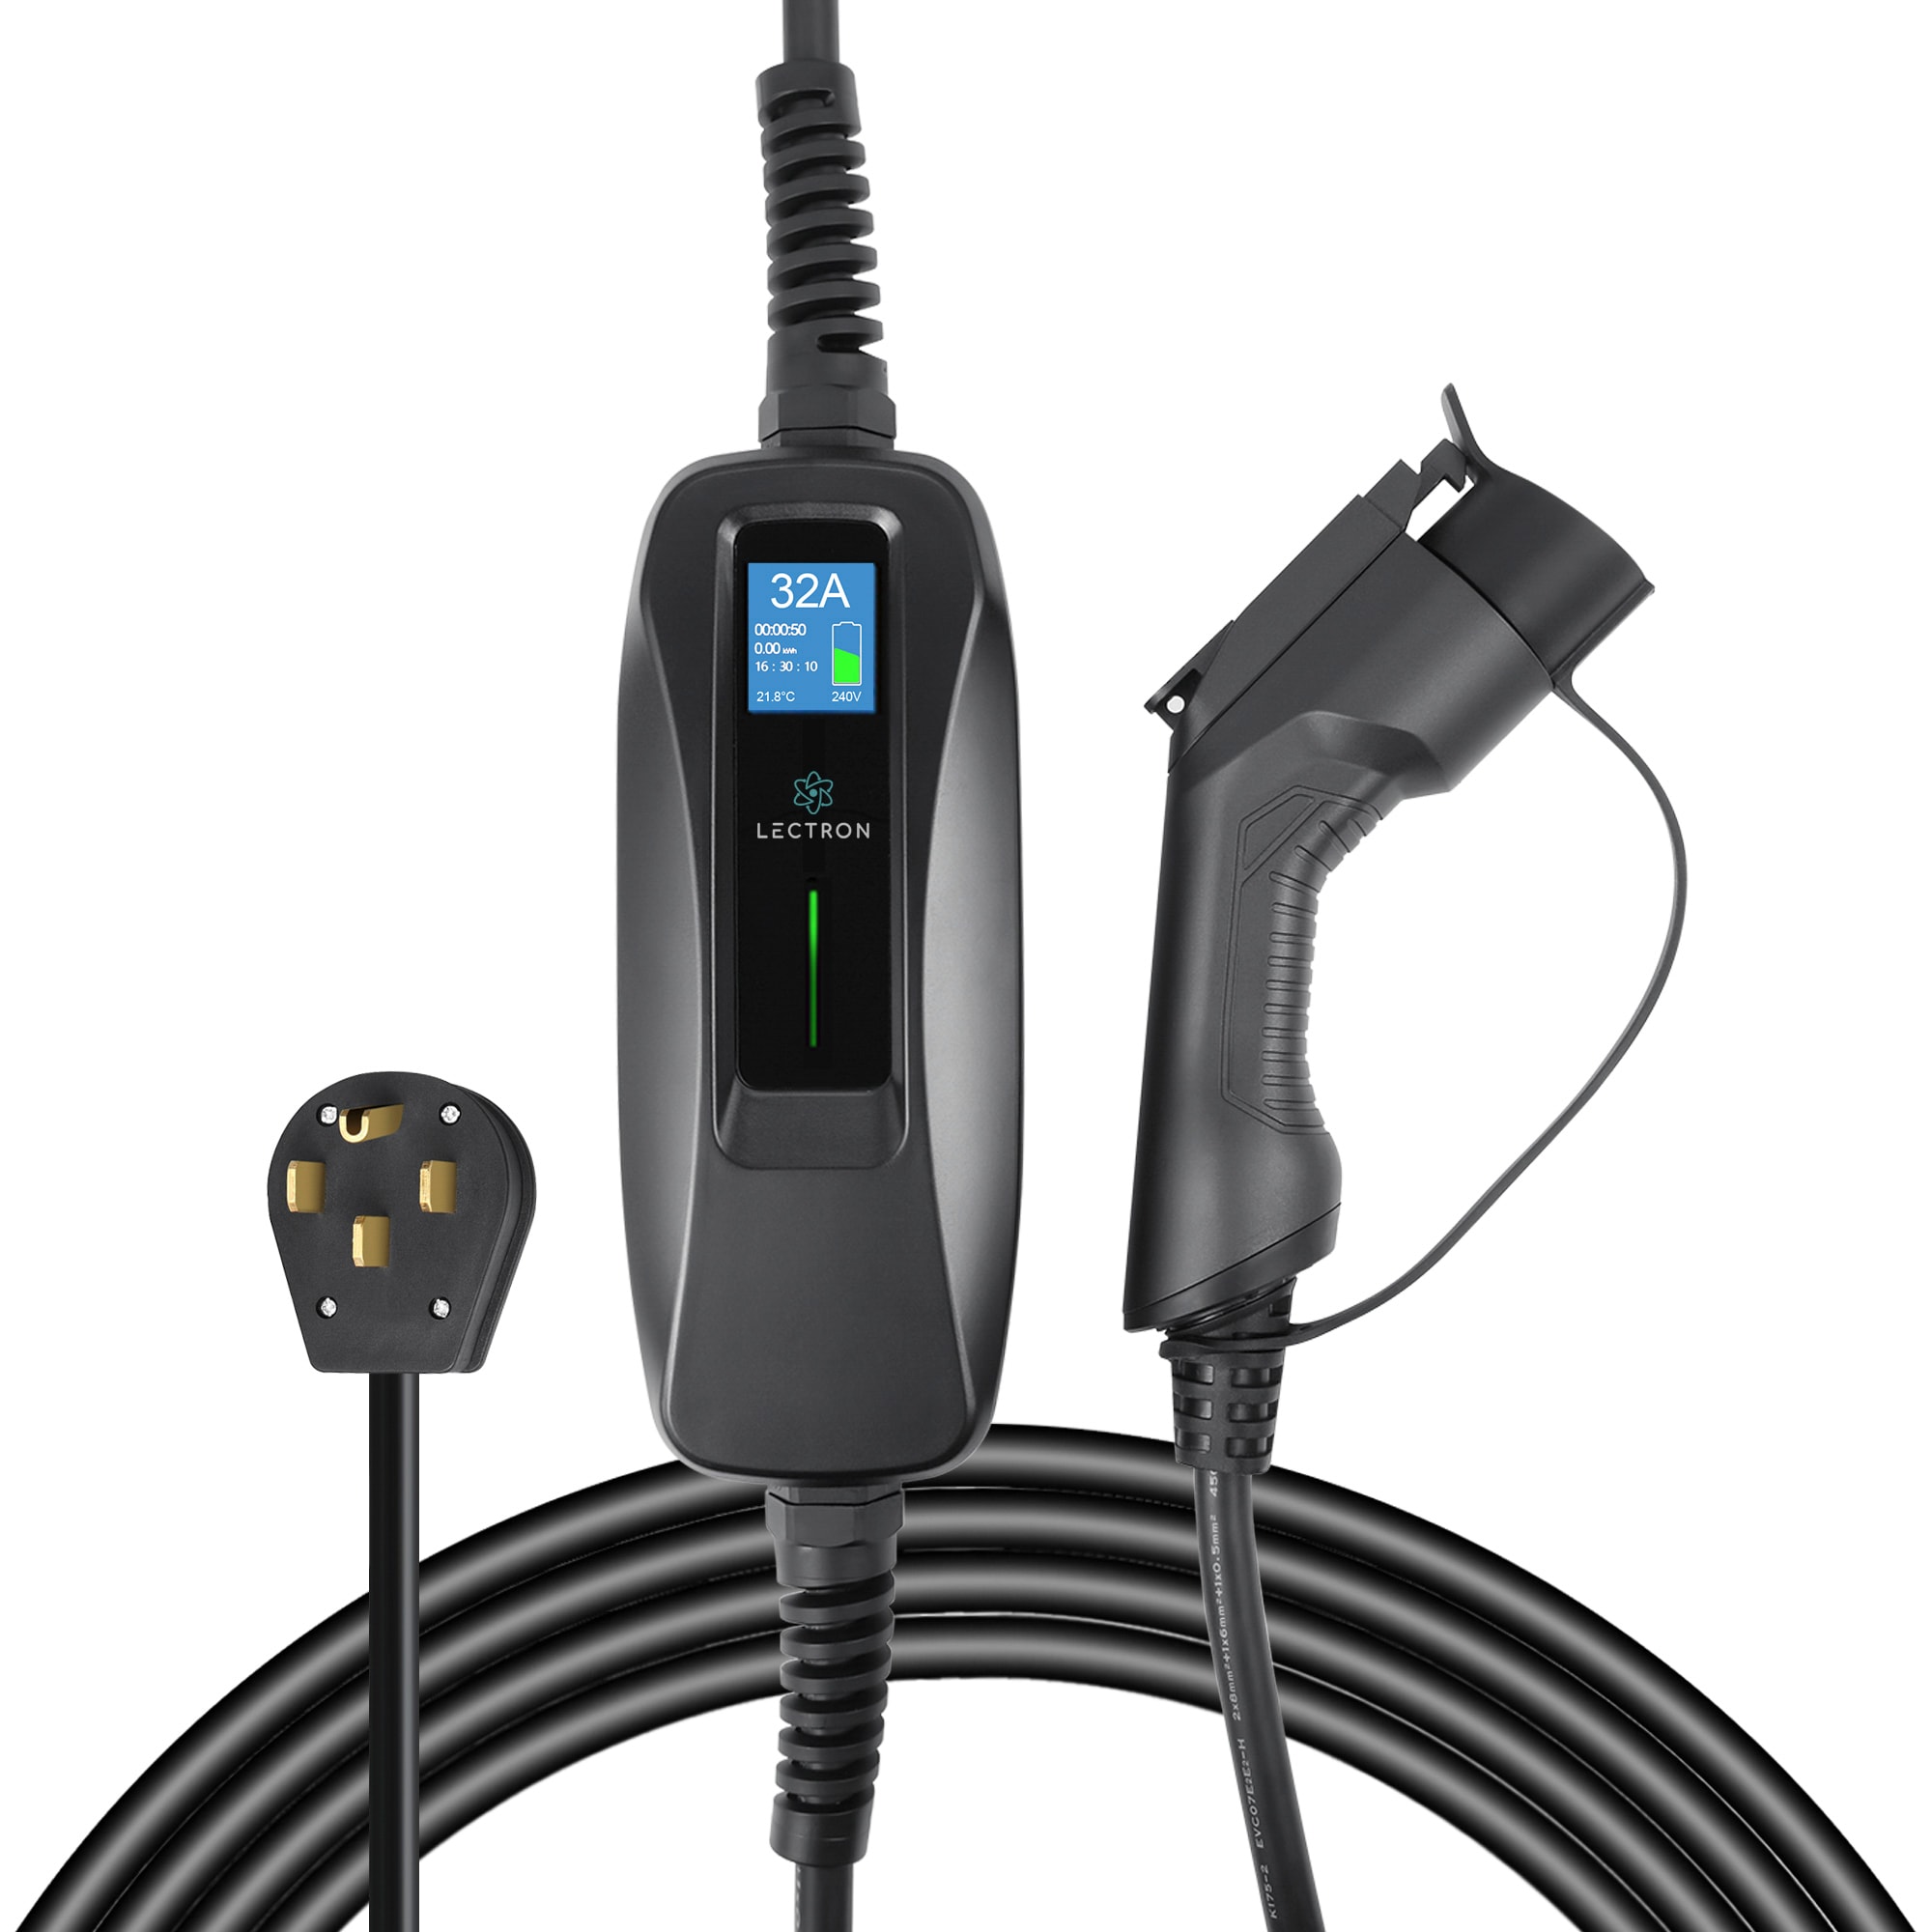  BougeRV Level 2 EV Charger Cable (32A, 25FT) Portable EVSE  Electric Vehicle Charging Station (NEMA14-50) Waterproof Indoor/Outdoor Use  : Automotive